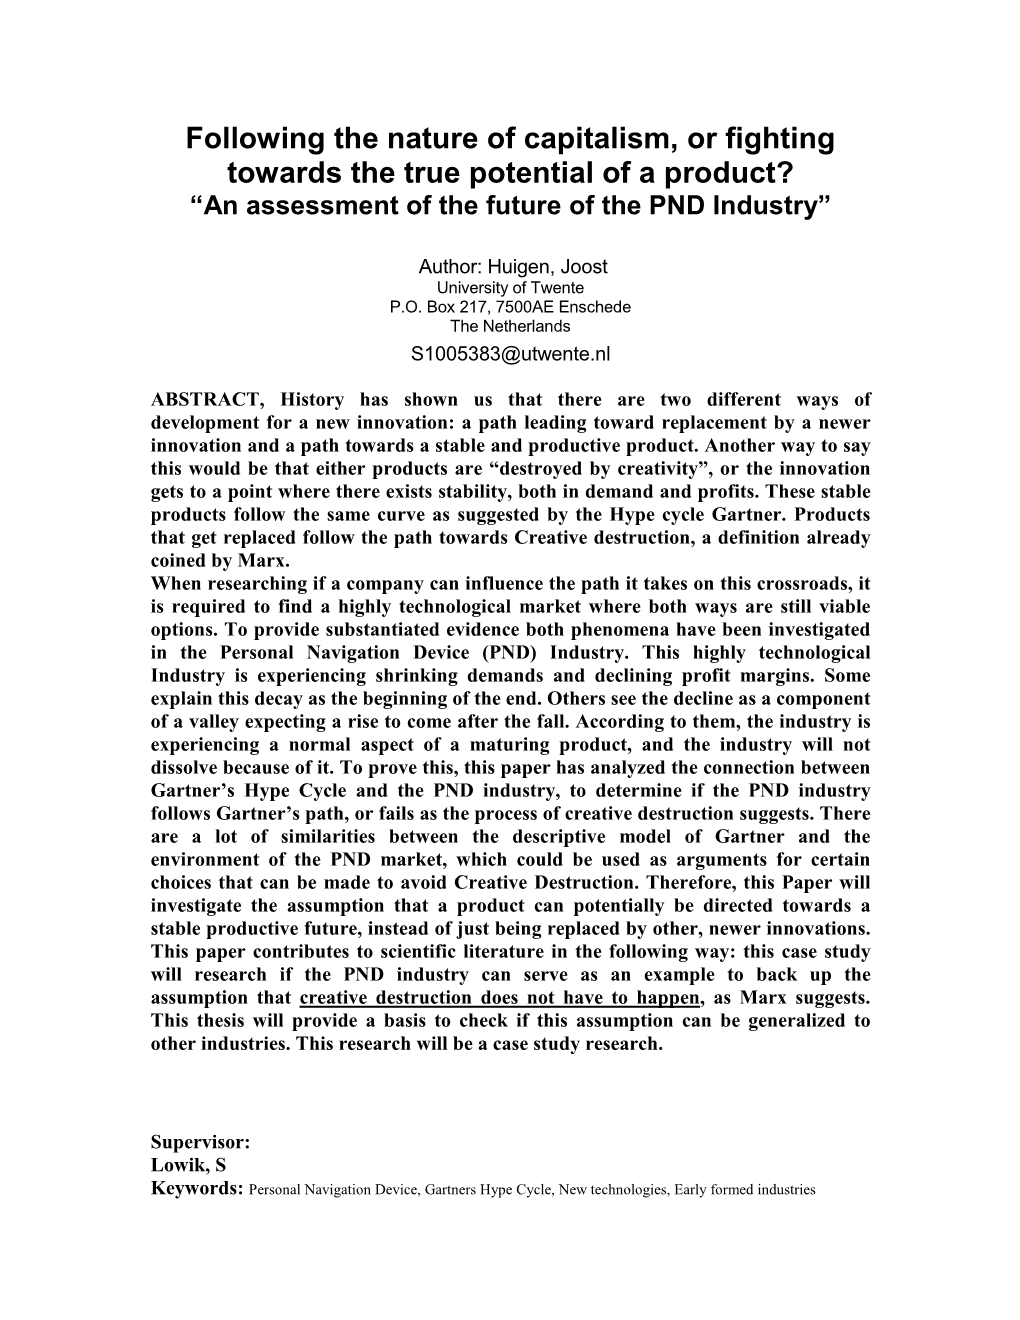 Following the Nature of Capitalism, Or Fighting Towards the True Potential of a Product? “An Assessment of the Future of the PND Industry”